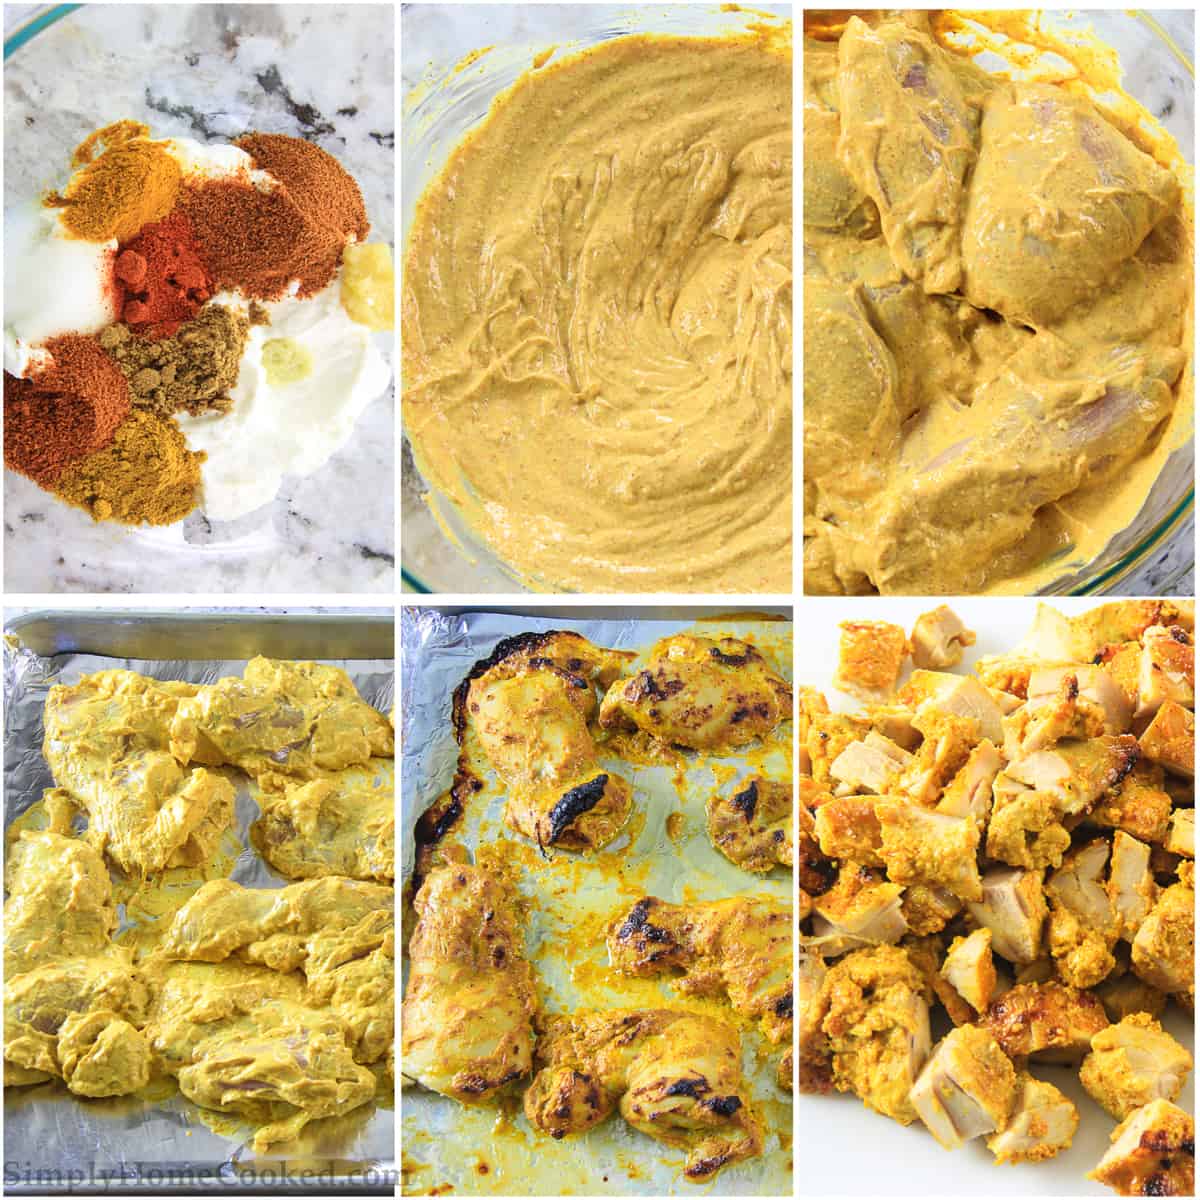 Six tiles showing the steps to make Indian butter chicken marinade, including combining spices with yogurt, covering the chicken, putting it on a baking sheet, and then cooking and cubing the chicken.